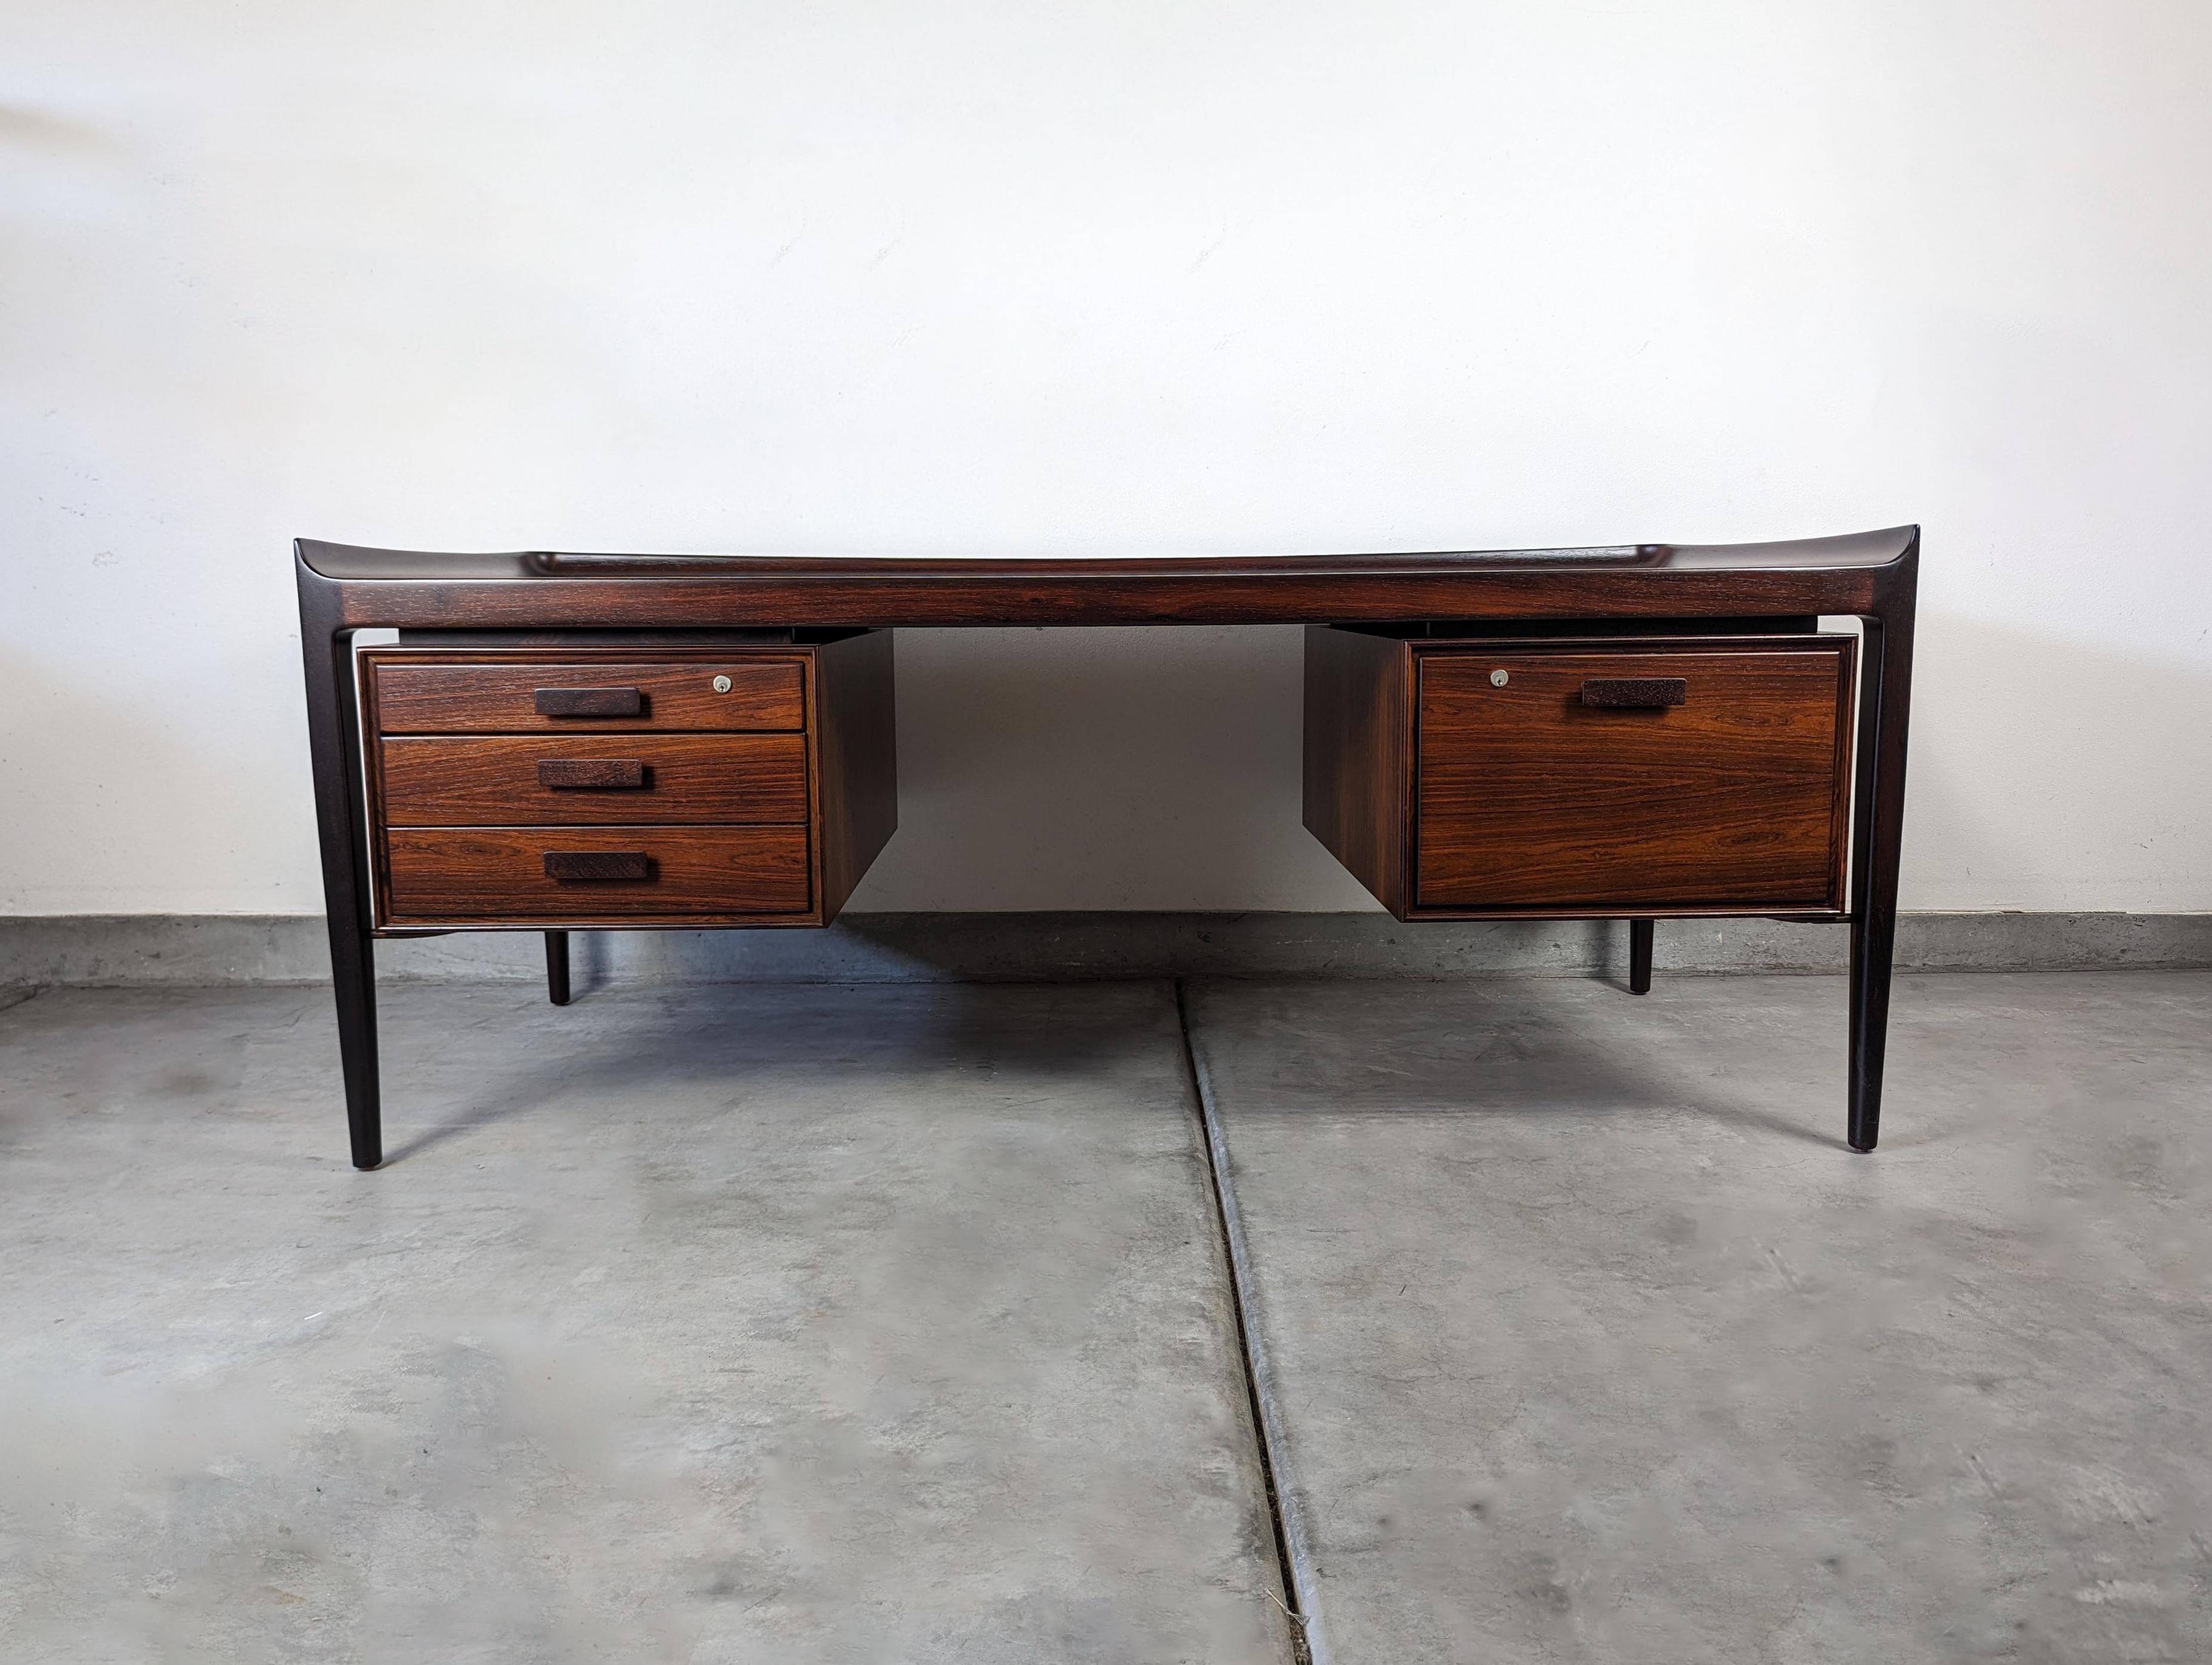 The Monumental Rosewood Scandinavian Desk is an exquisite piece of furniture that seamlessly blends elegance, functionality, and the timeless beauty of rosewood. Crafted with meticulous attention to detail, this desk is a true testament to